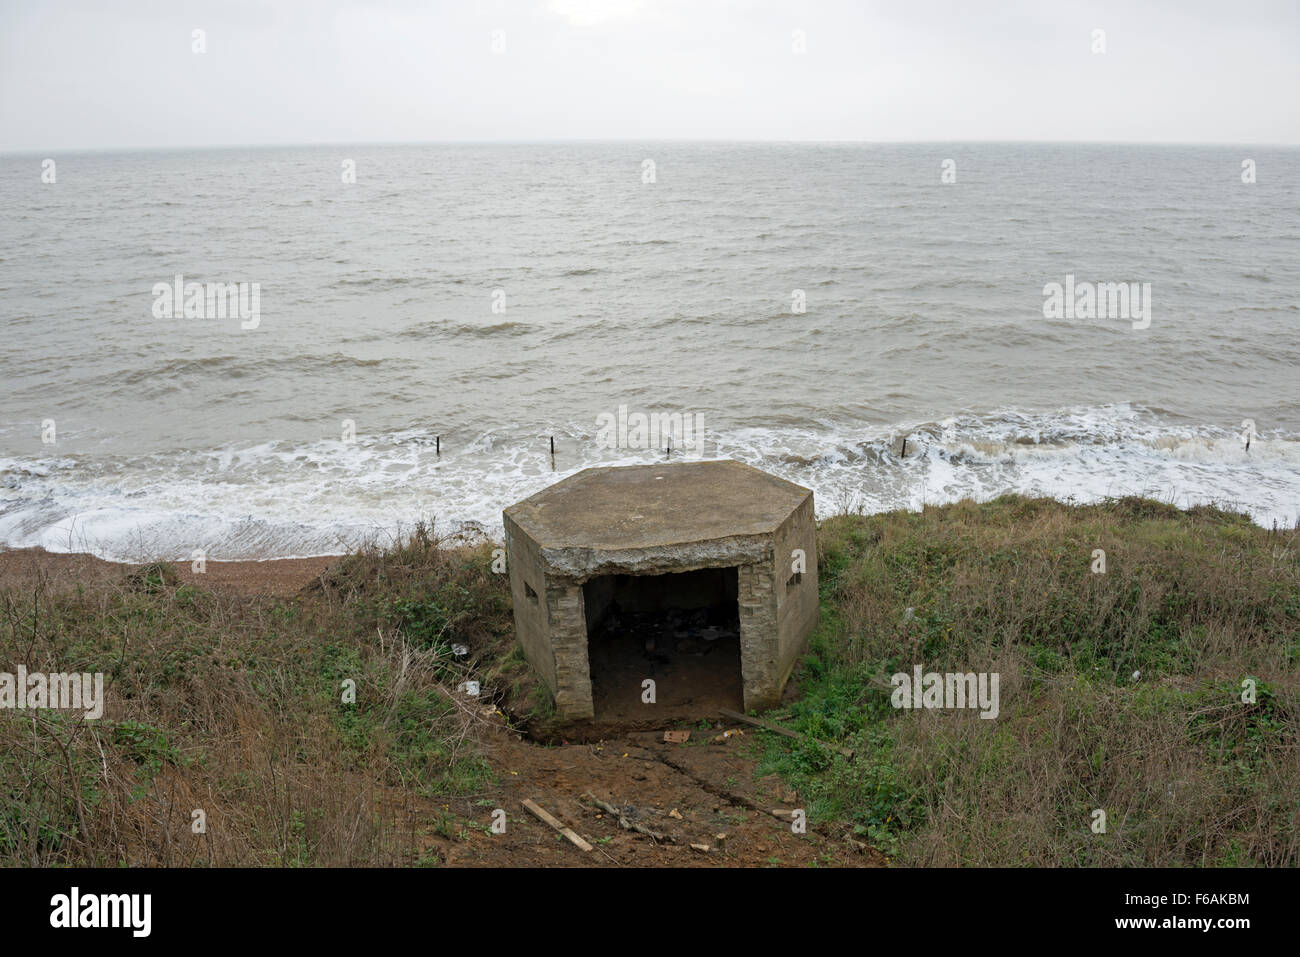 WW2 pillbox which has fallen from the top of the cliff due to coastal erosion Bawdsey Suffolk UK Stock Photo